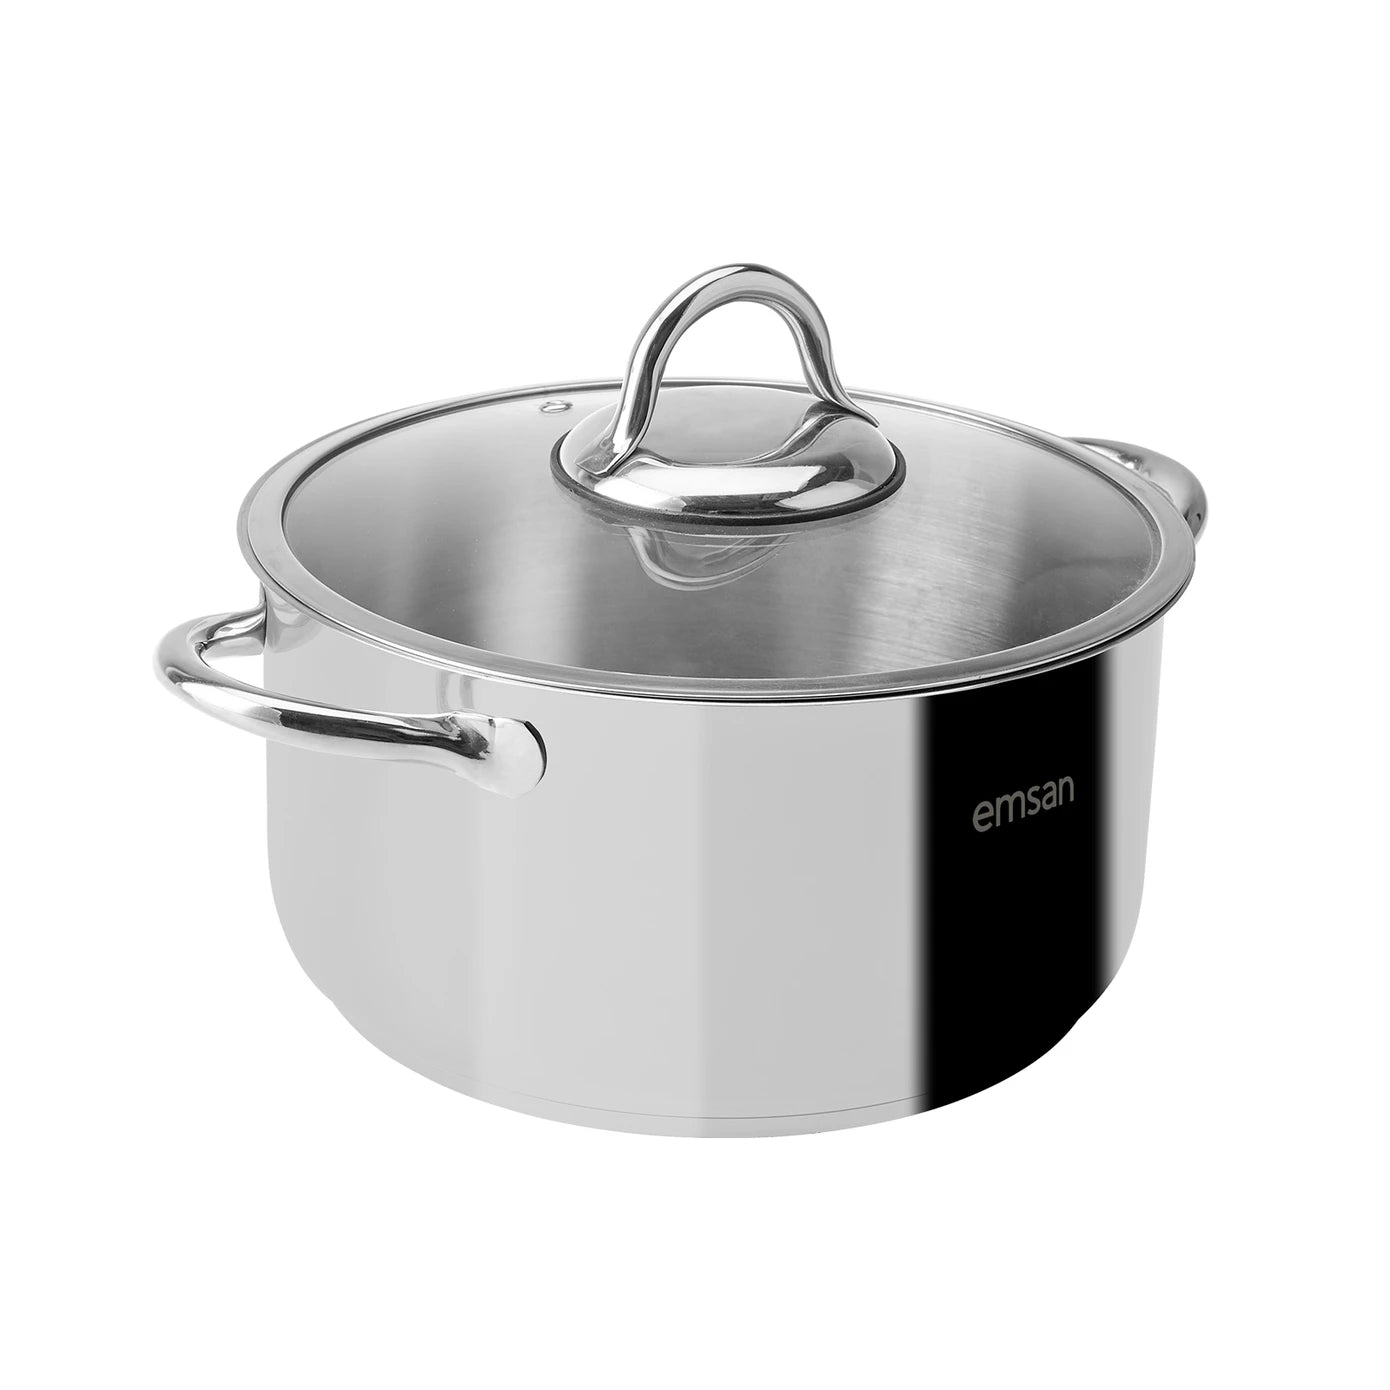 Stainless Deep Pot - Versatile and Durable Cooking Essential